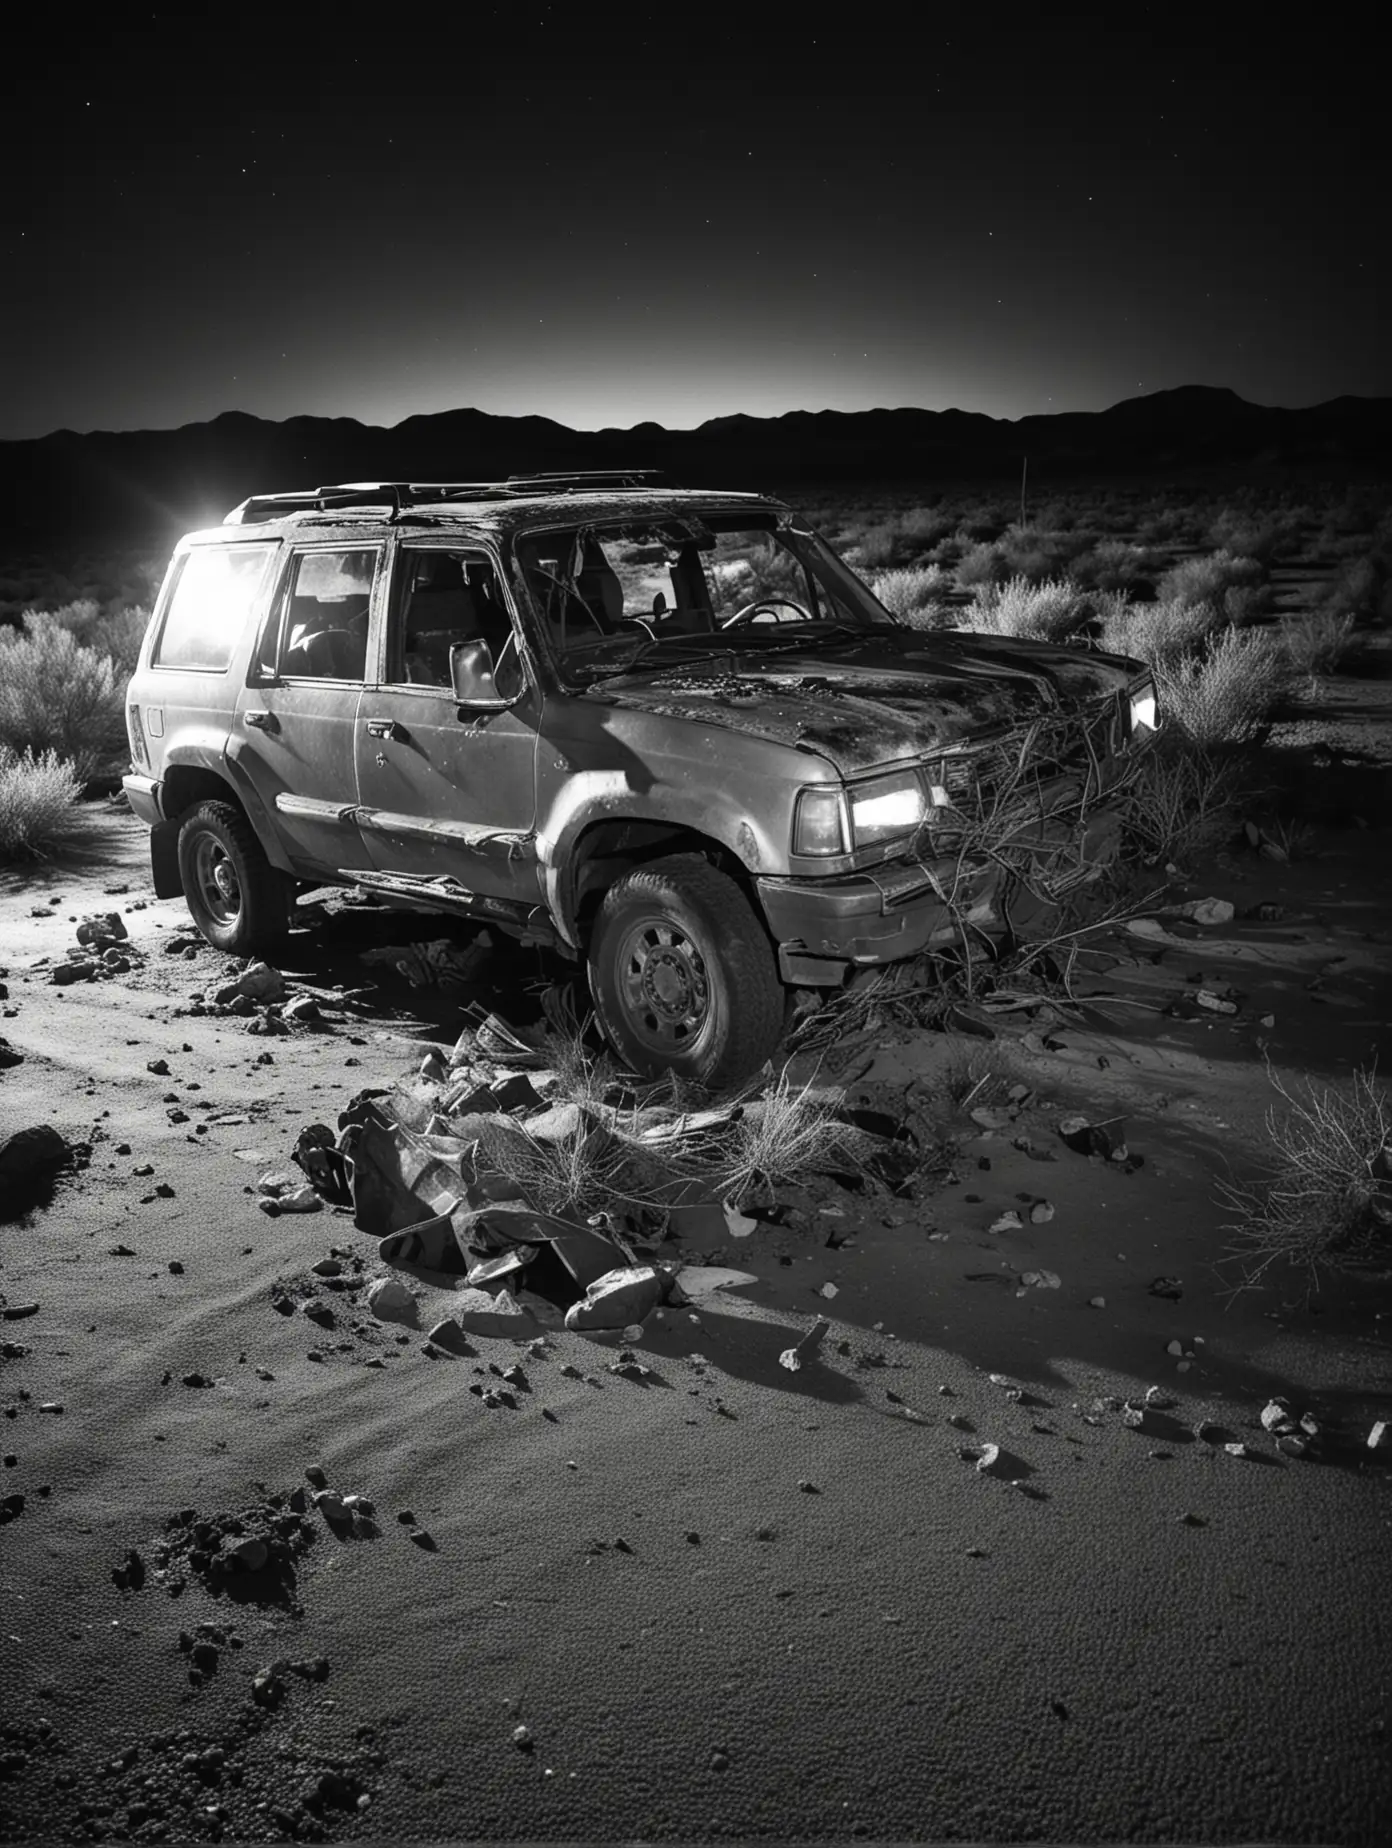 Abandoned SUV Wreck in Desert Night Eerie Black and White Photograph